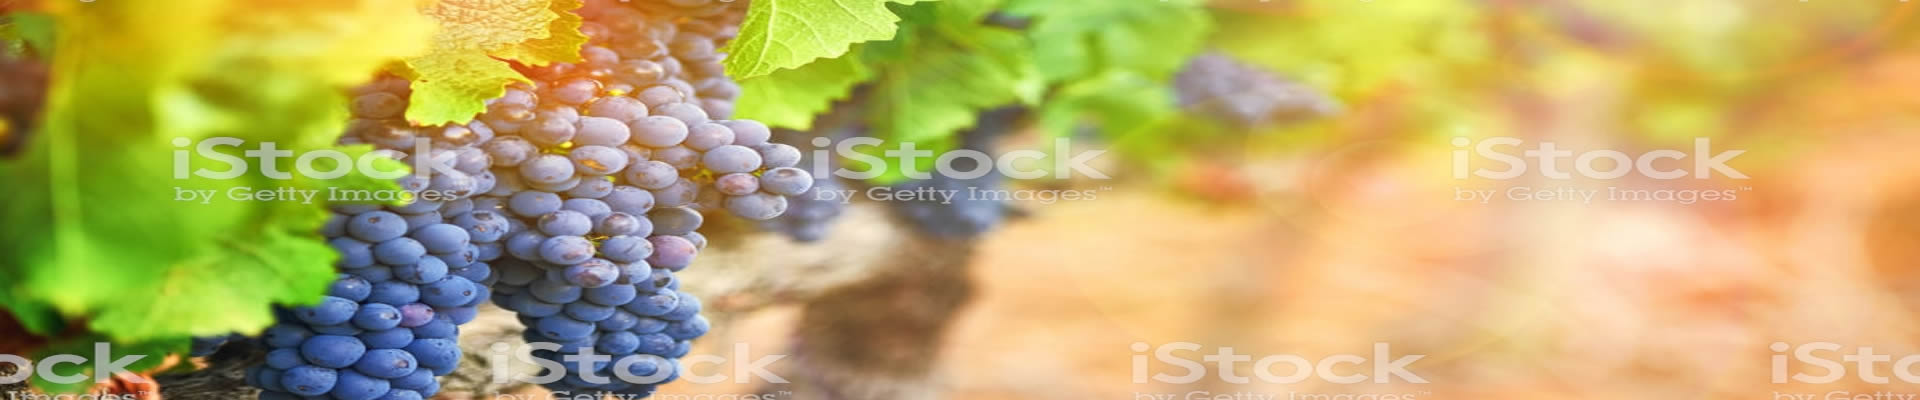 Grapes growing champagne